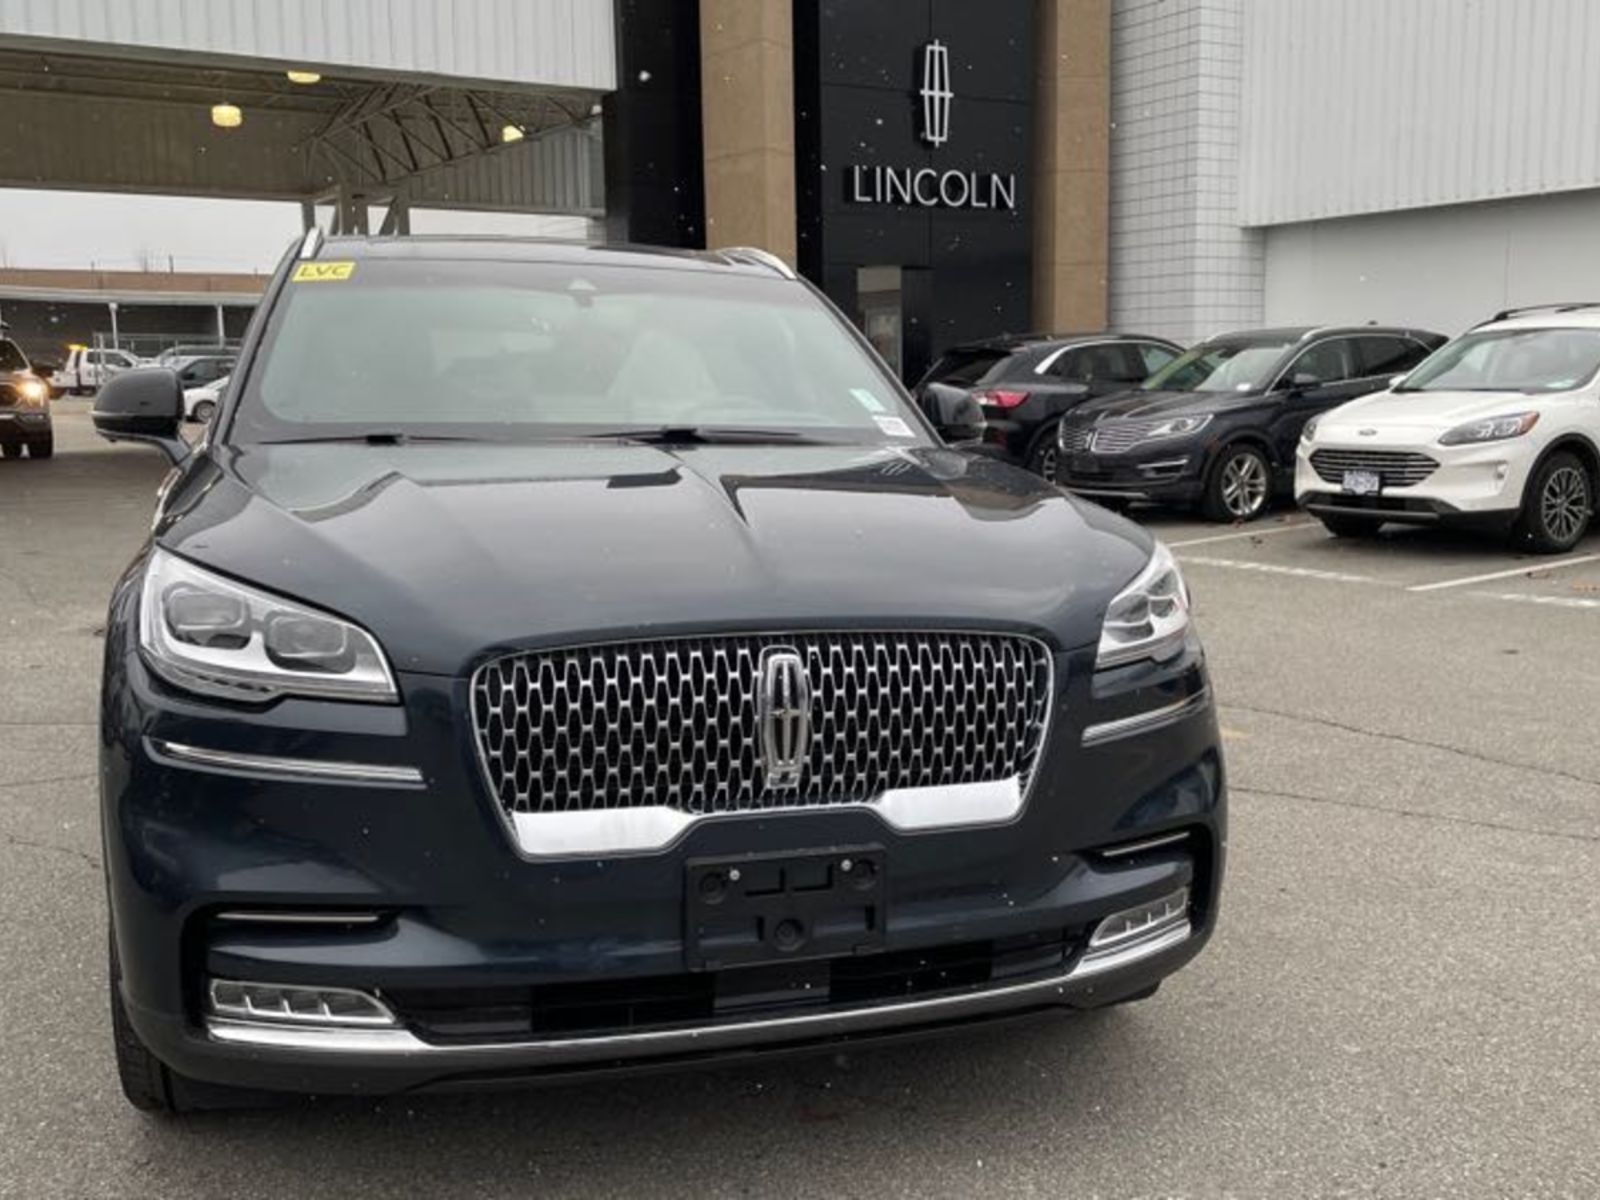 2023 Lincoln Aviator RESERVE AWD - 10TOUCHSCREEN/WIRELESS CHARGING PAD